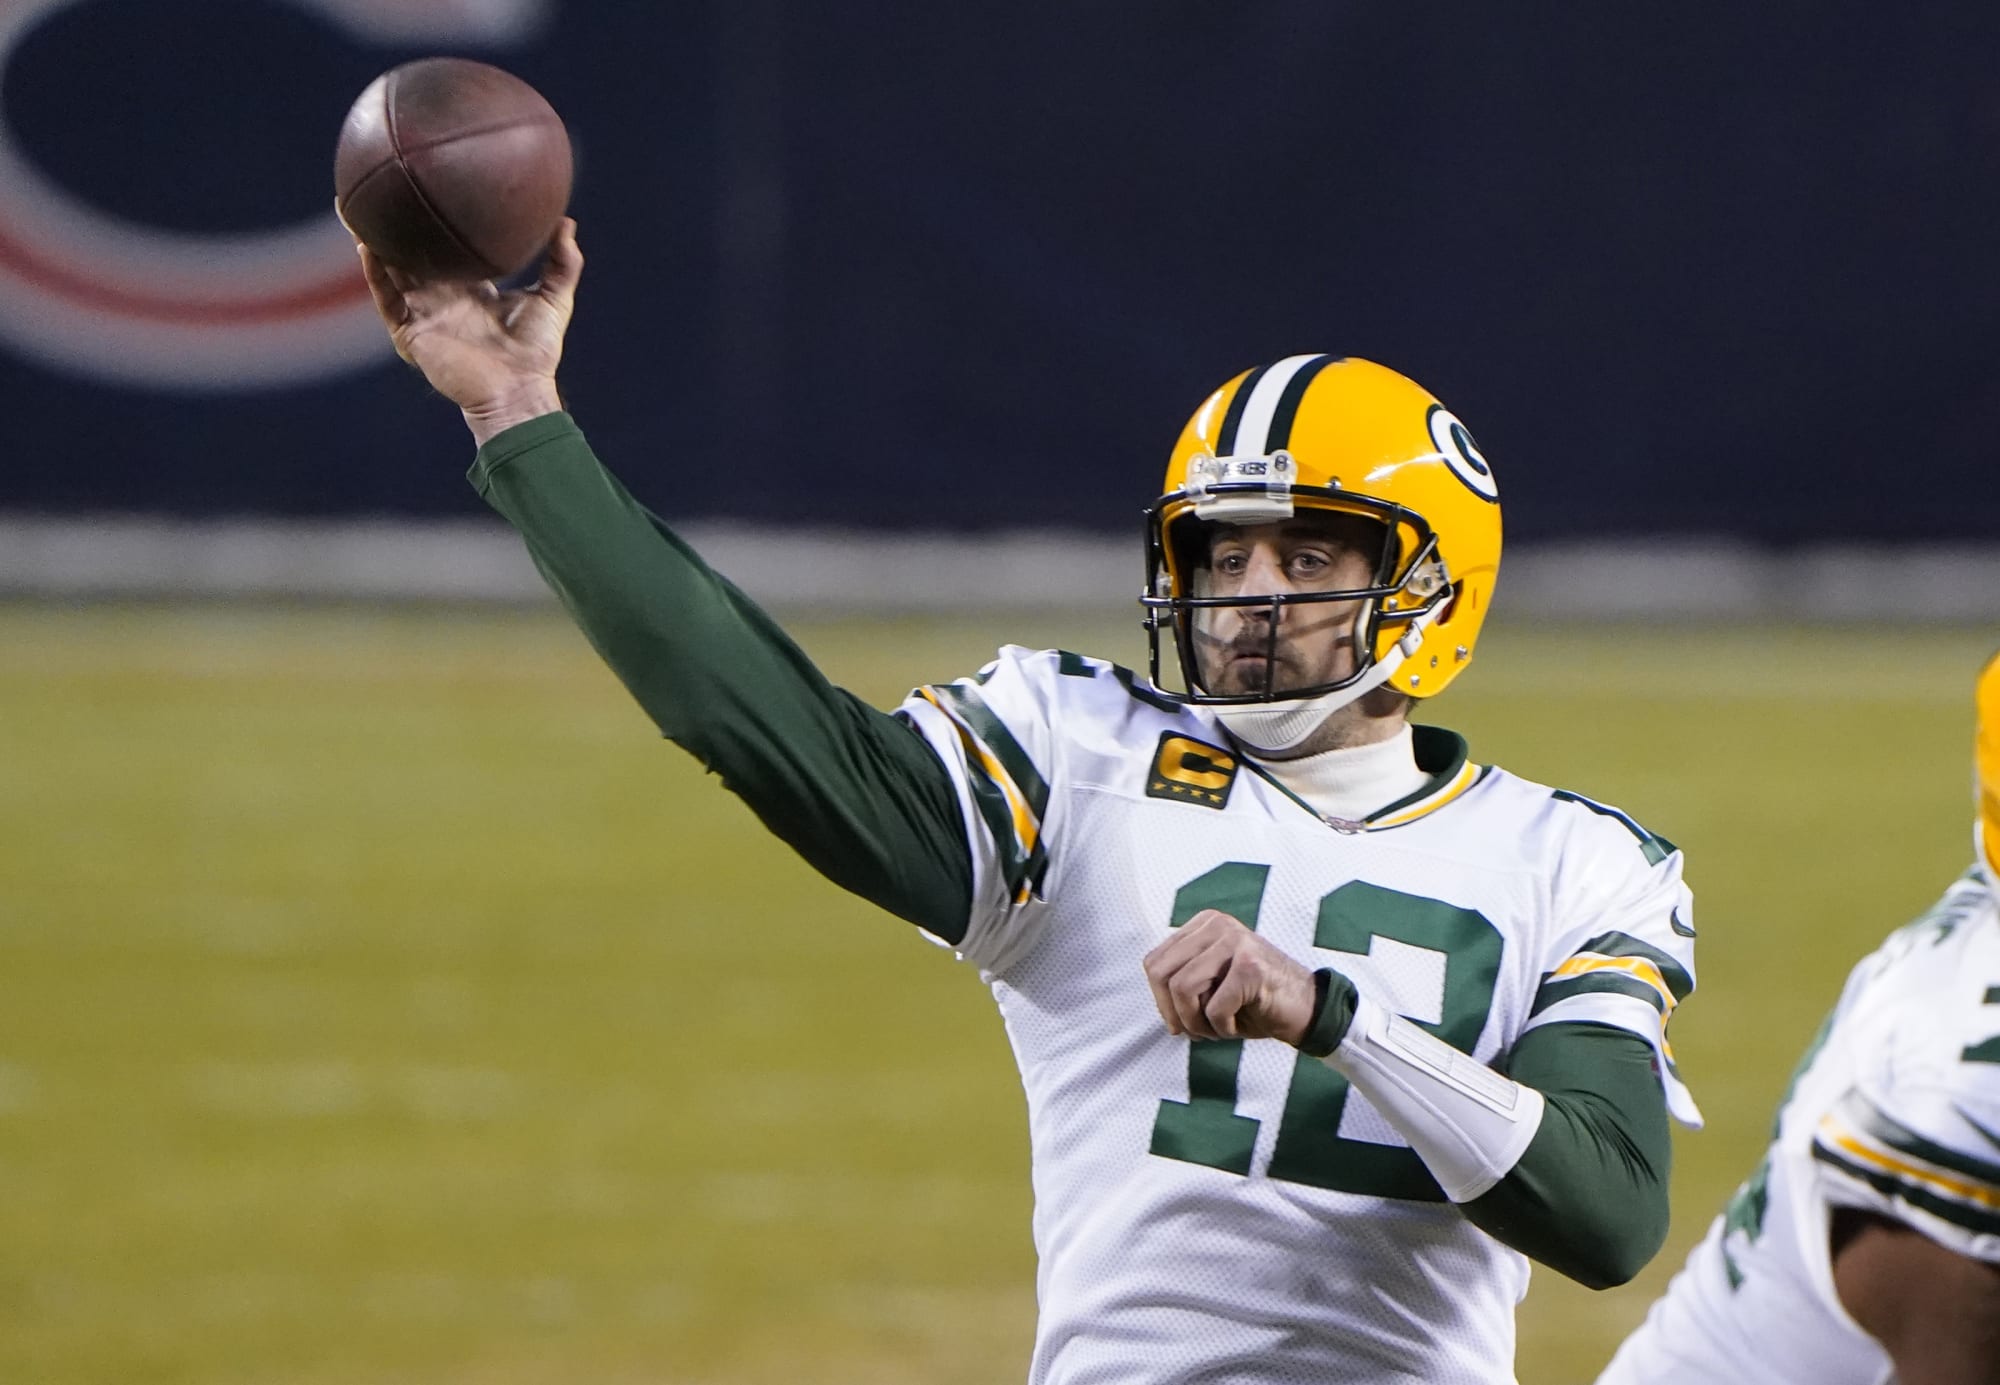 ESPN insider give latest news on Aaron Rodgers trade market